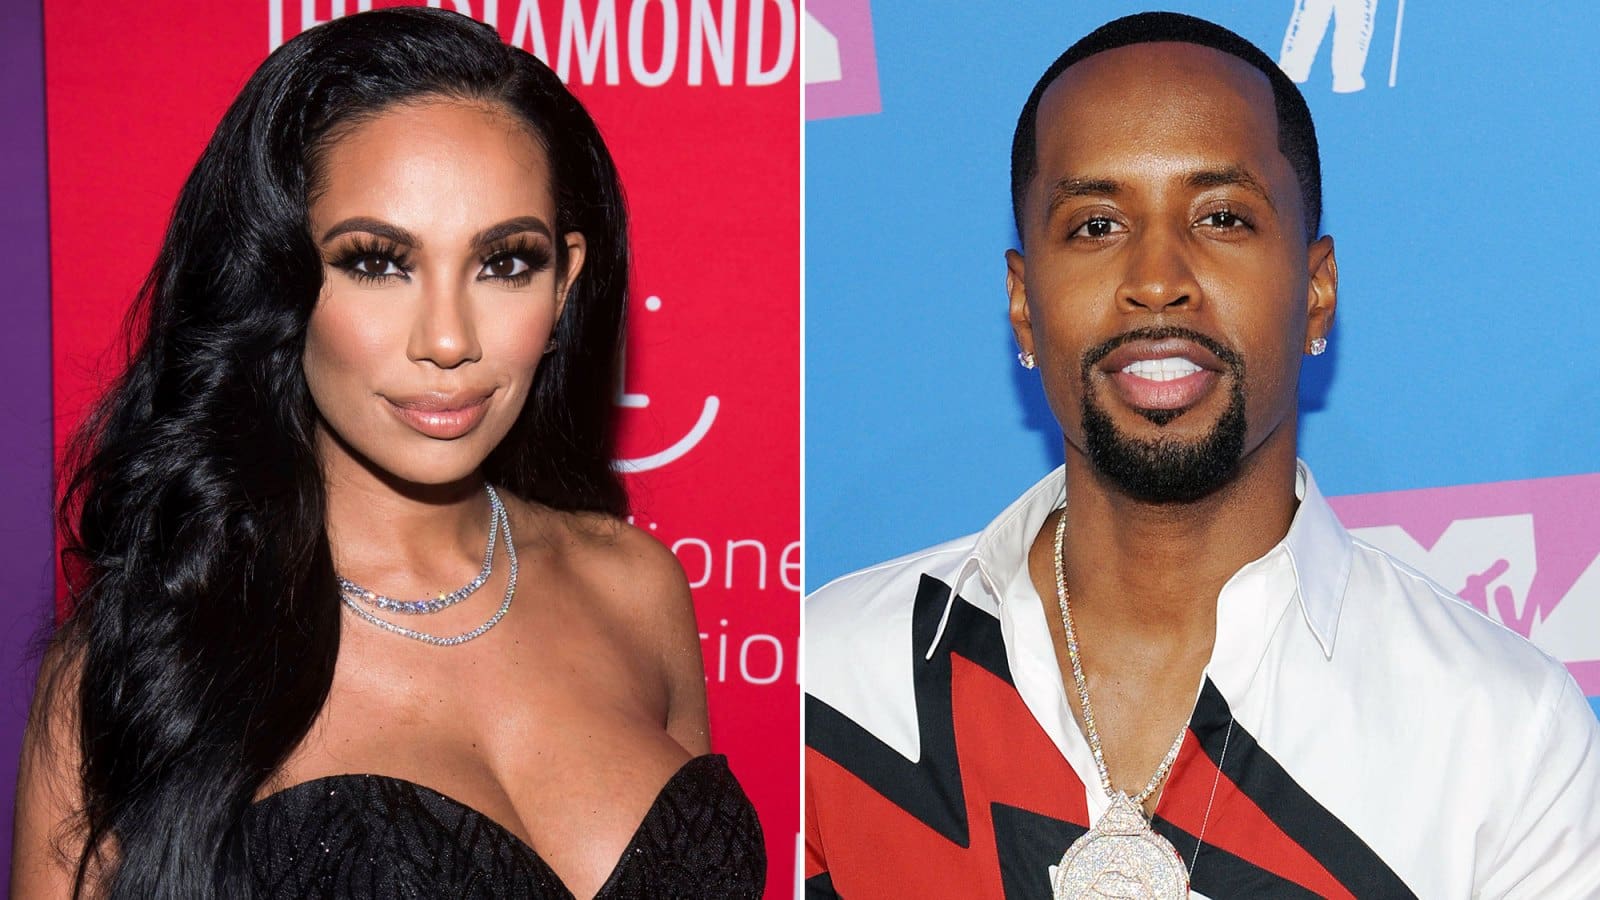 Erica Mena And Safaree Are Still Going Strong - Check Out The Video From Her Birthday Trip